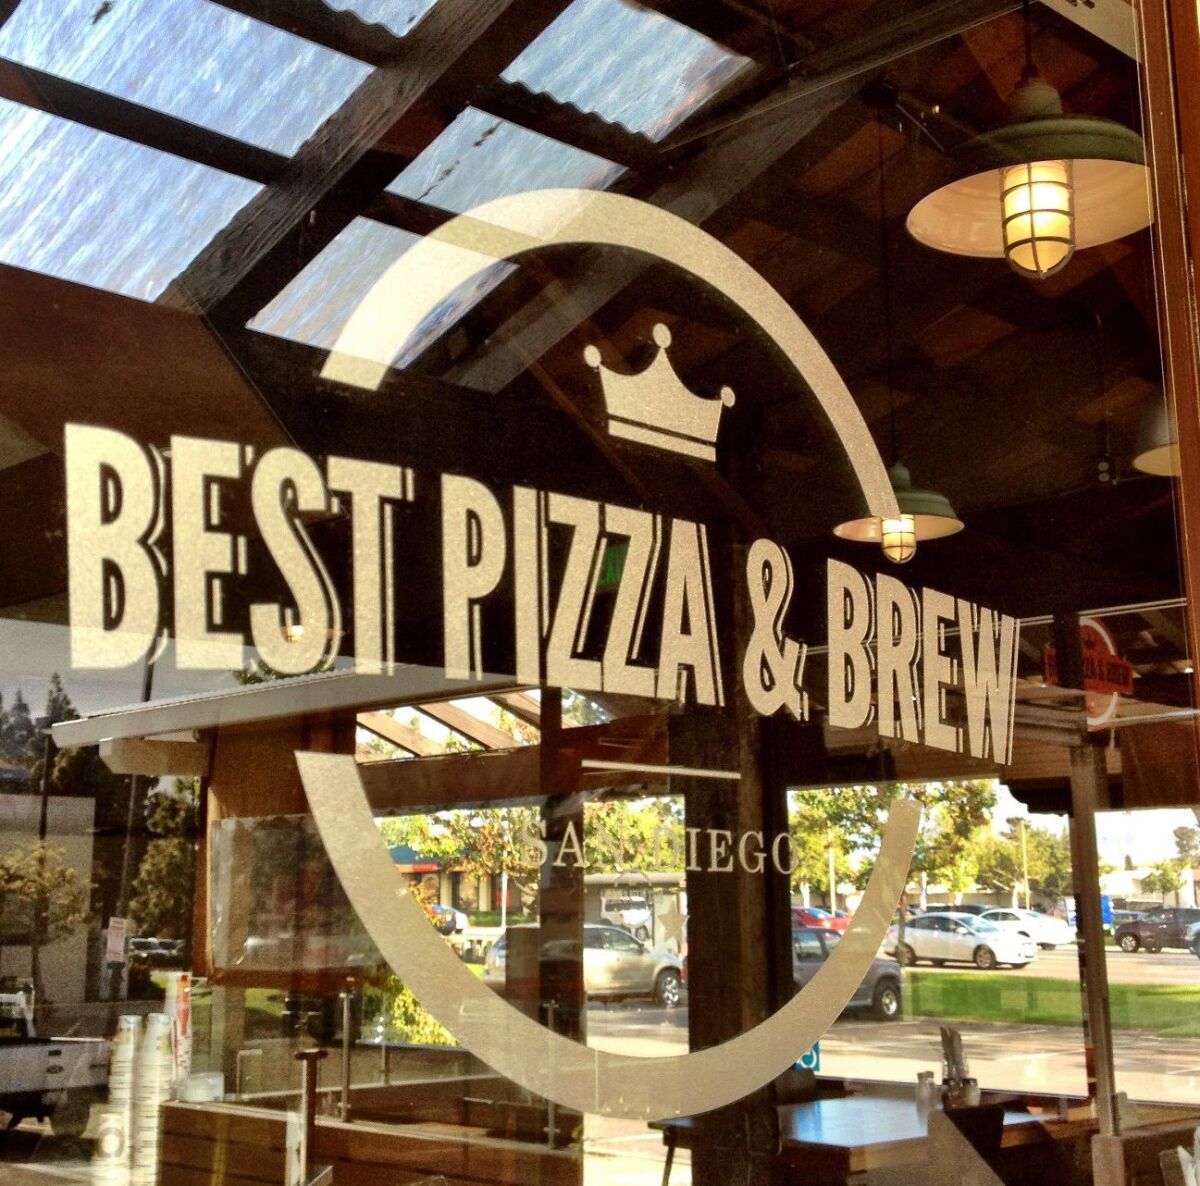 Best Pizza & Brew will open its fifth location in Vista in April.